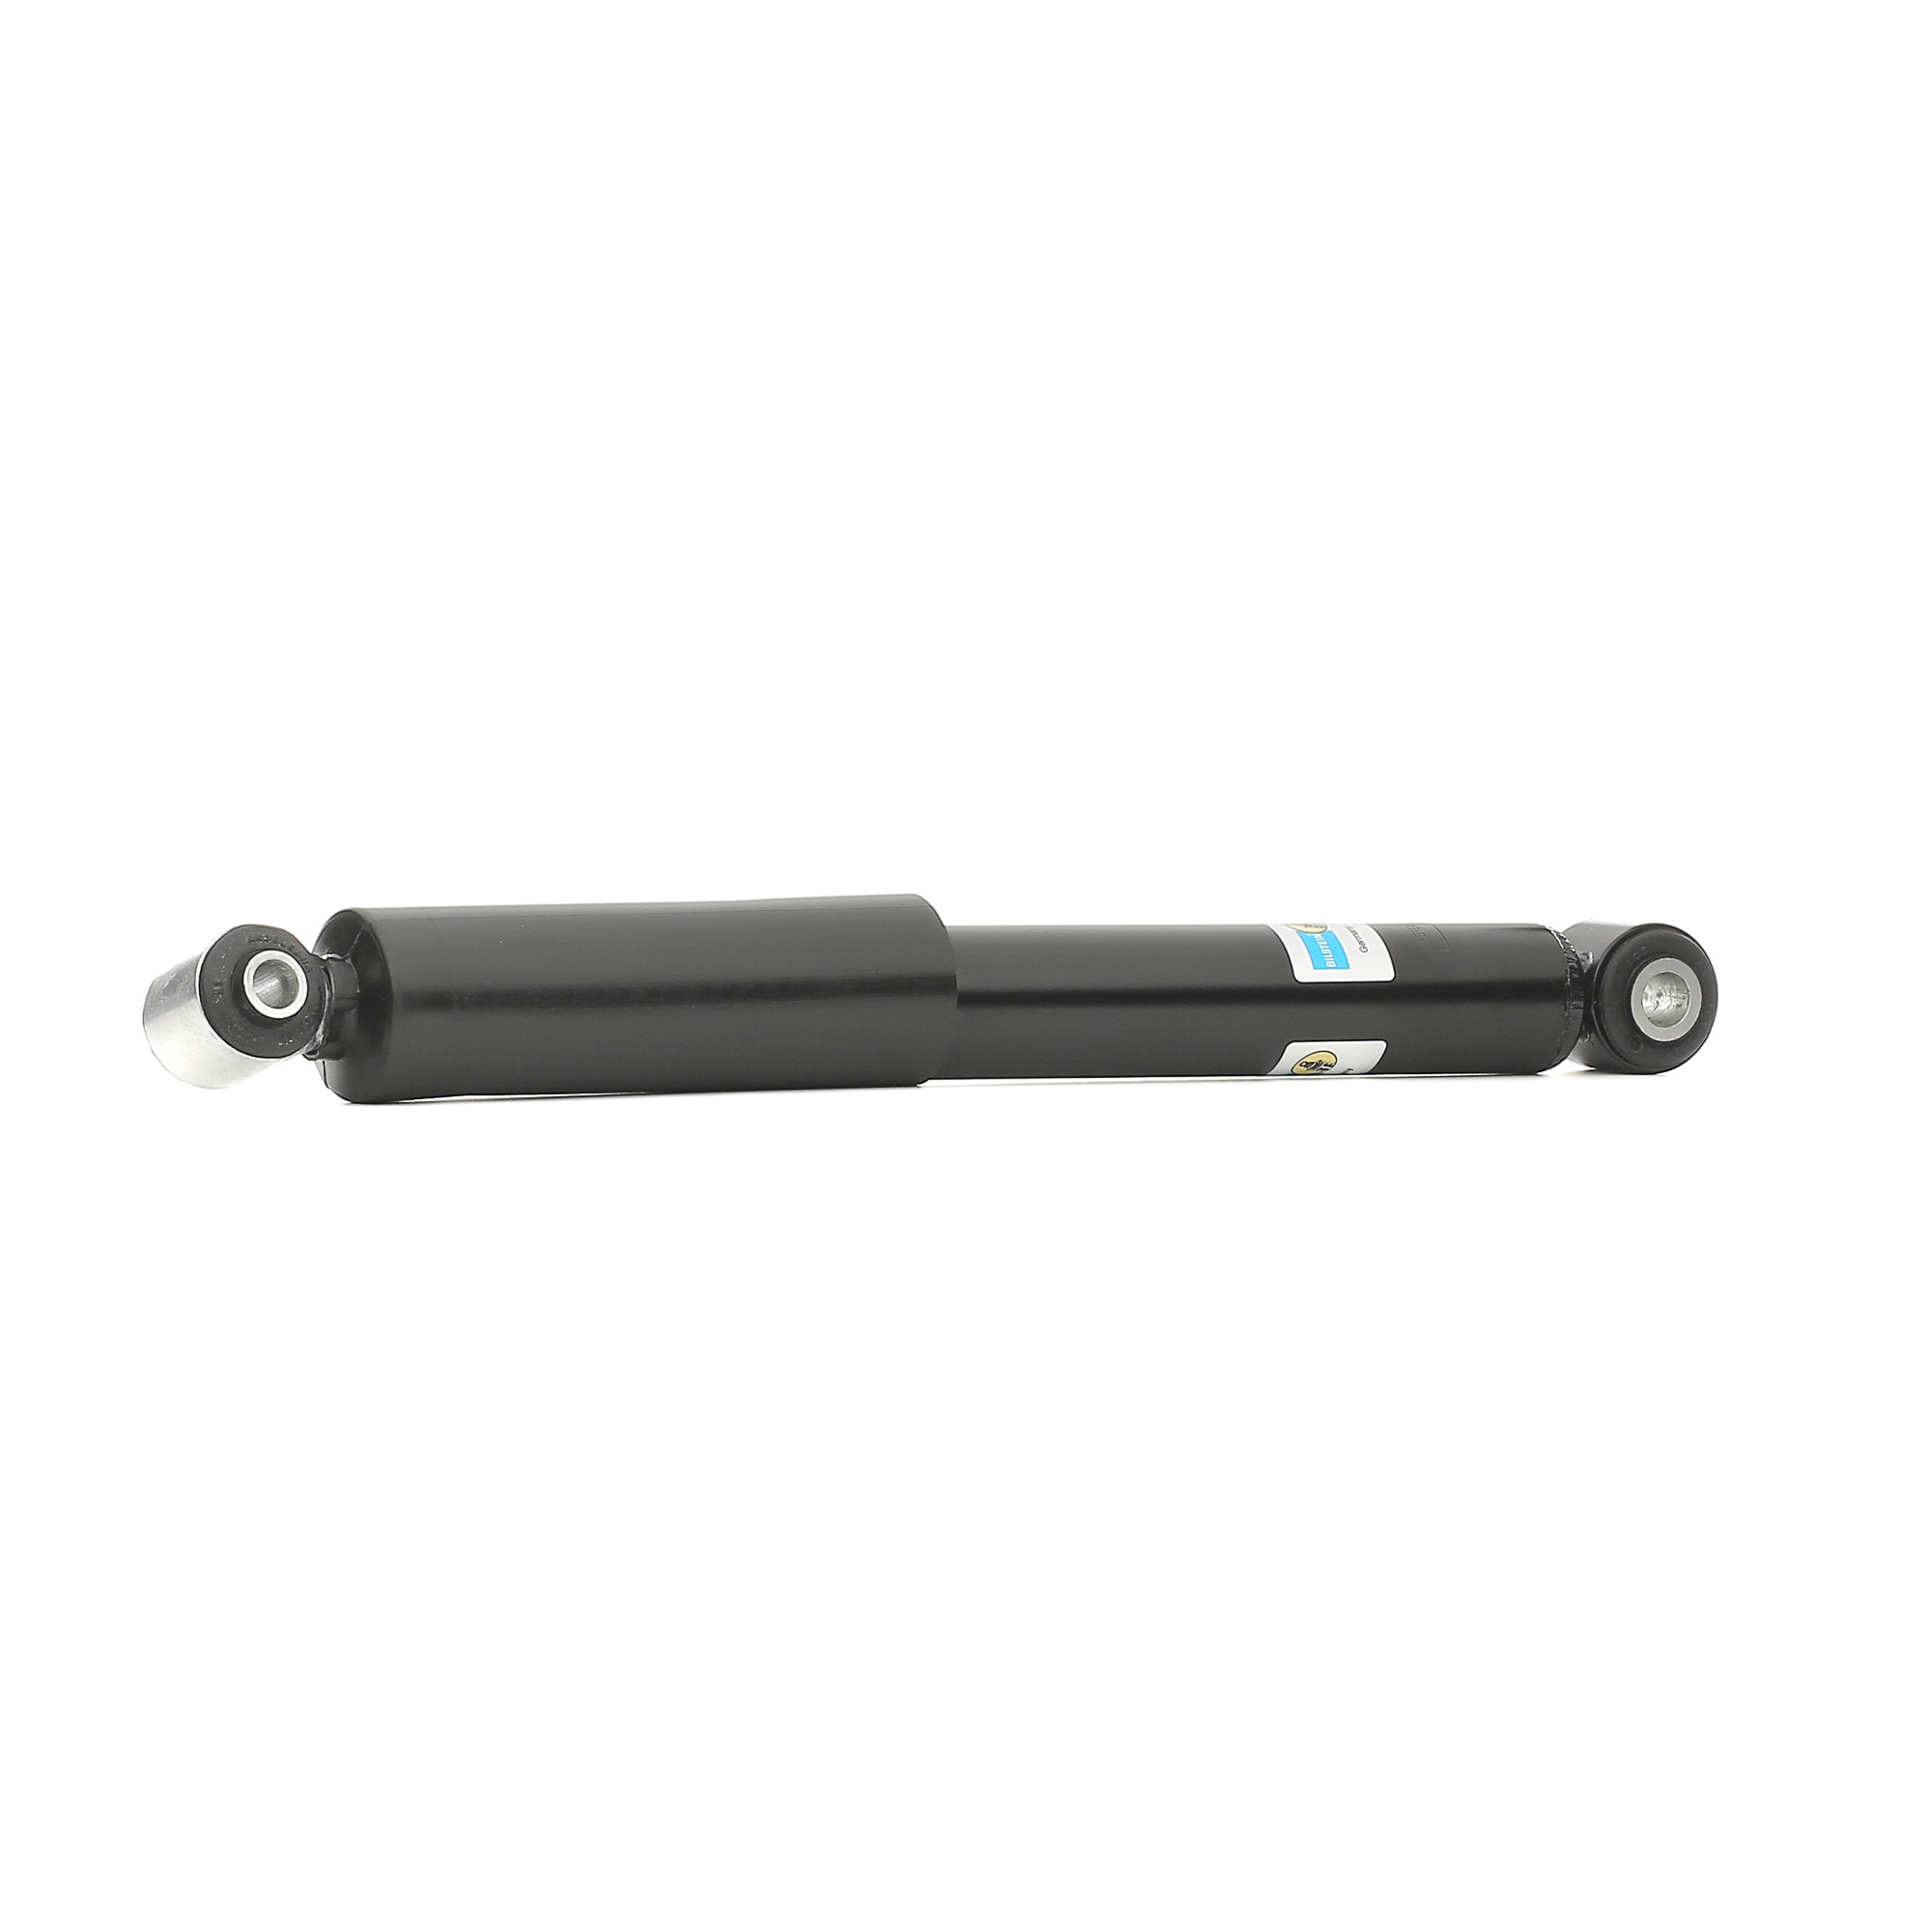 BNE-A662 BILSTEIN - B4 OE Replacement Rear Axle, Gas Pressure, Twin-Tube, Absorber does not carry a spring, Top eye, Bottom eye Shocks 19-106625 buy